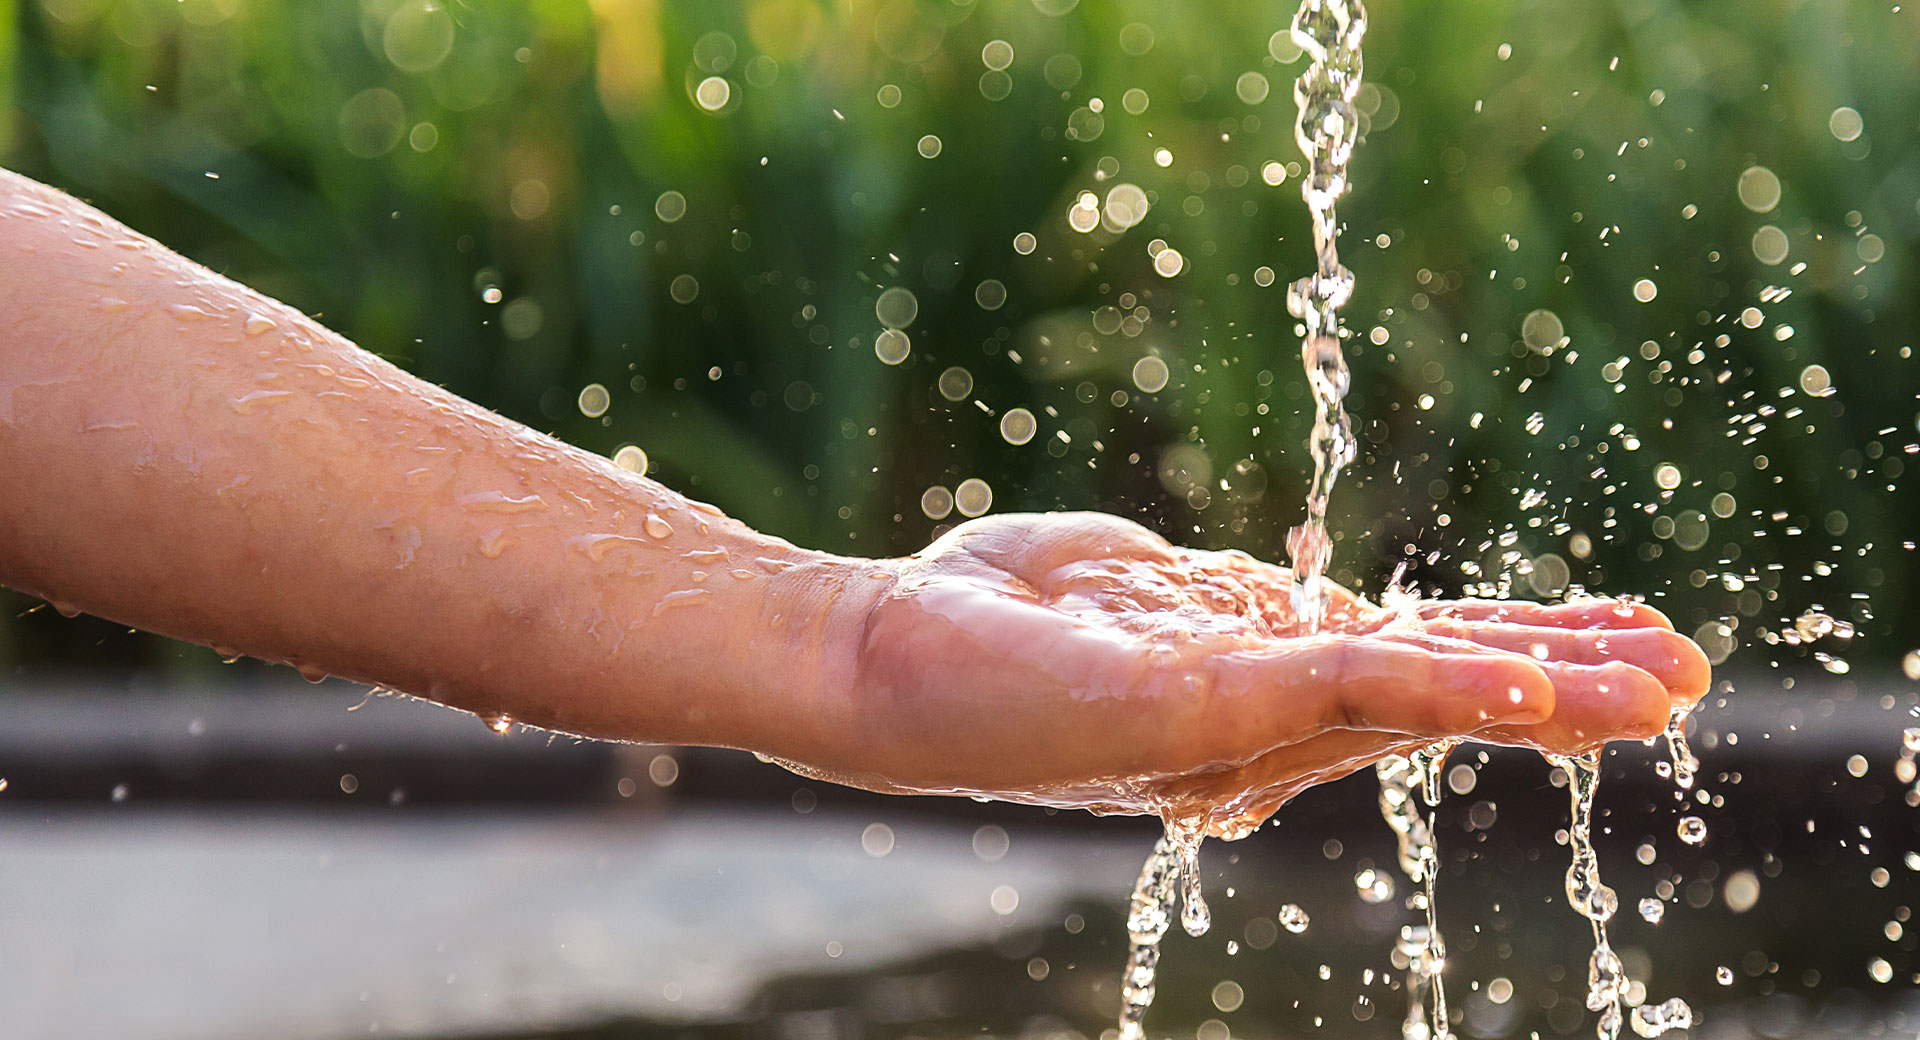 A close-up of water splashing into the palm of a person